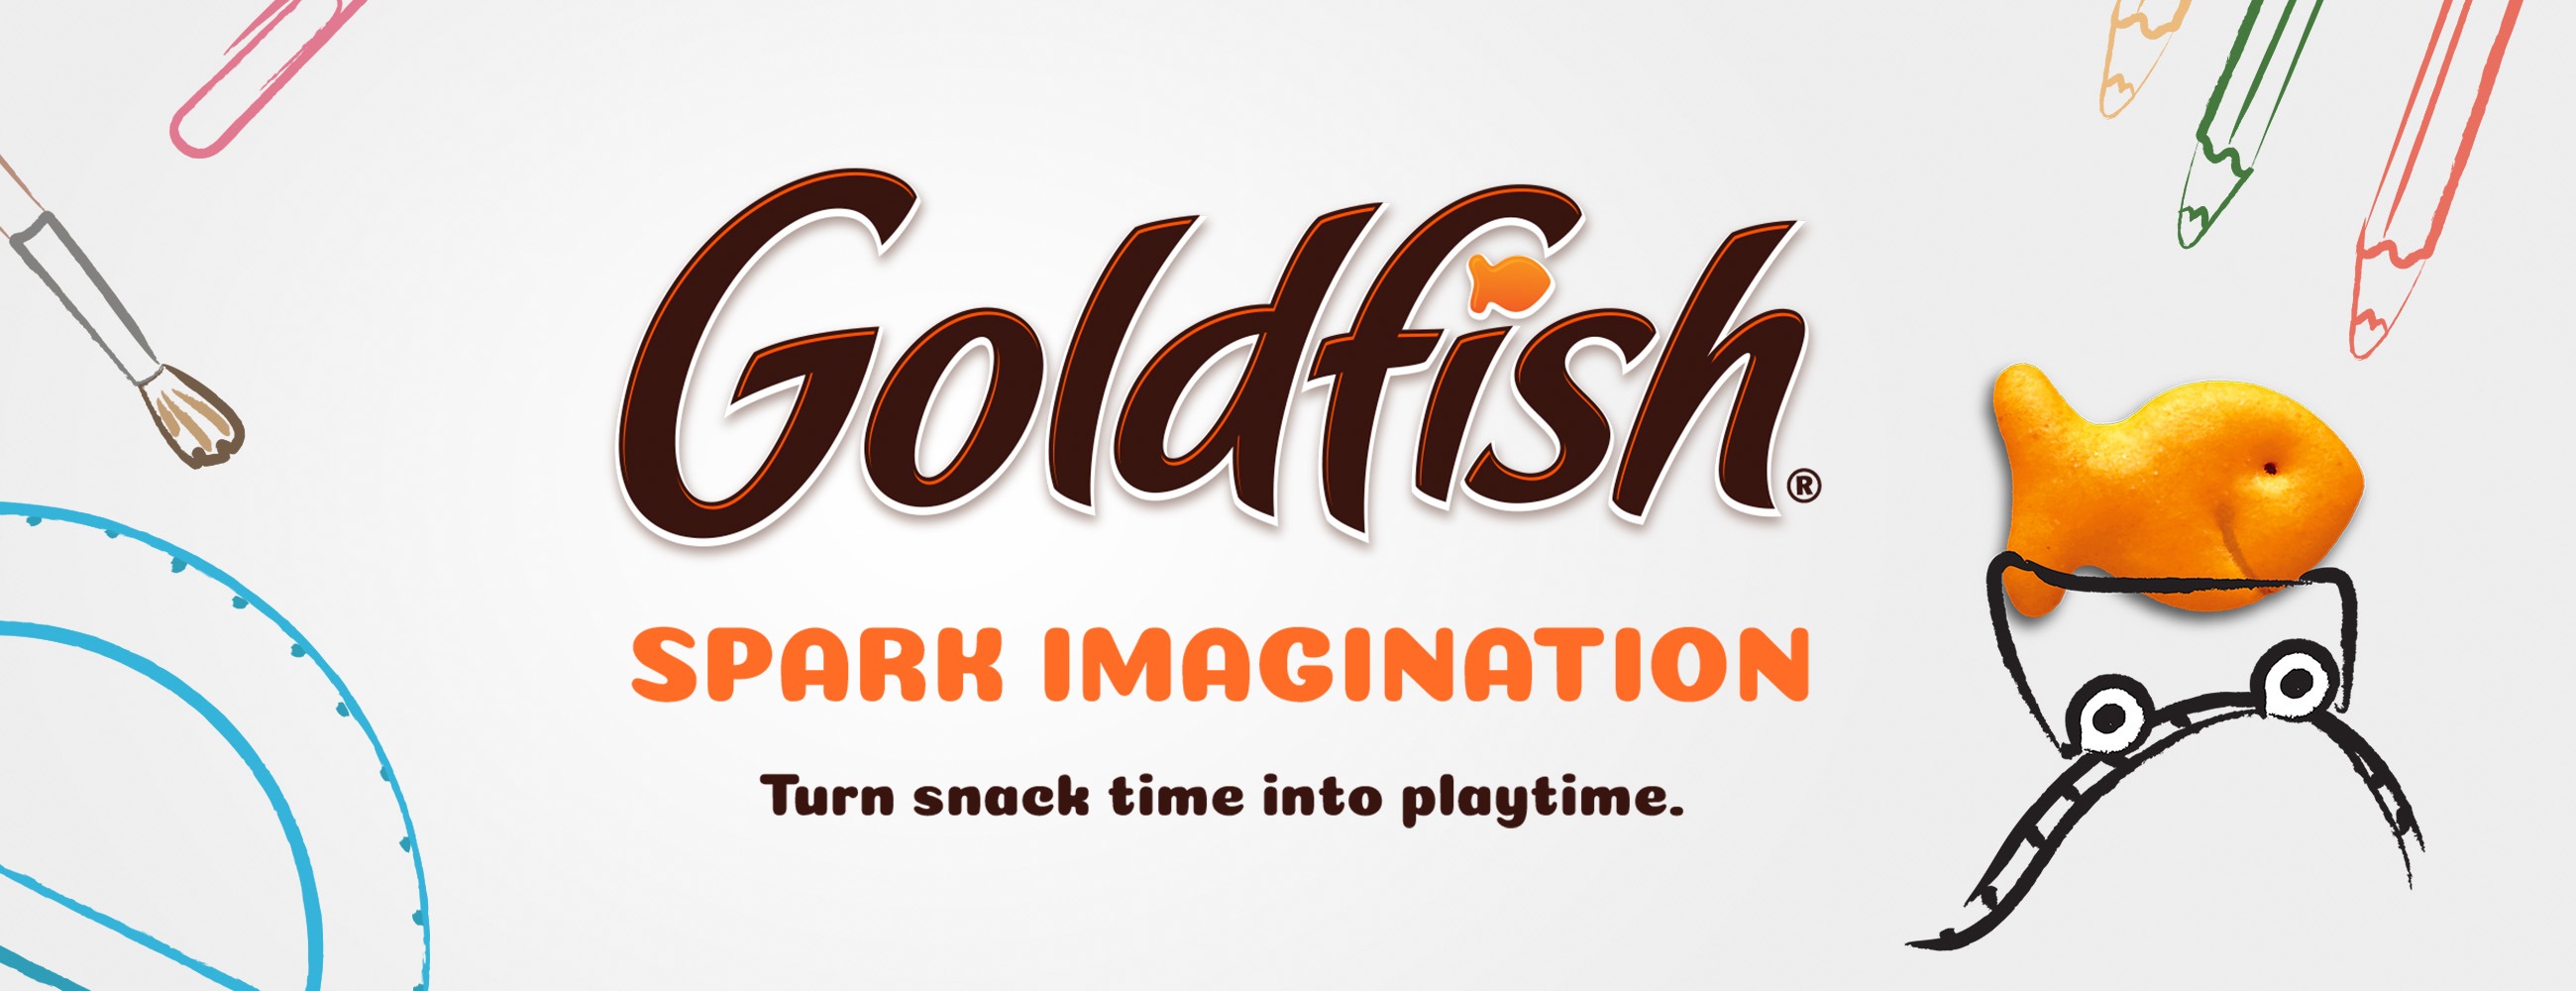 Goldfish® Spark Imagination | Turn snack time into playtime.